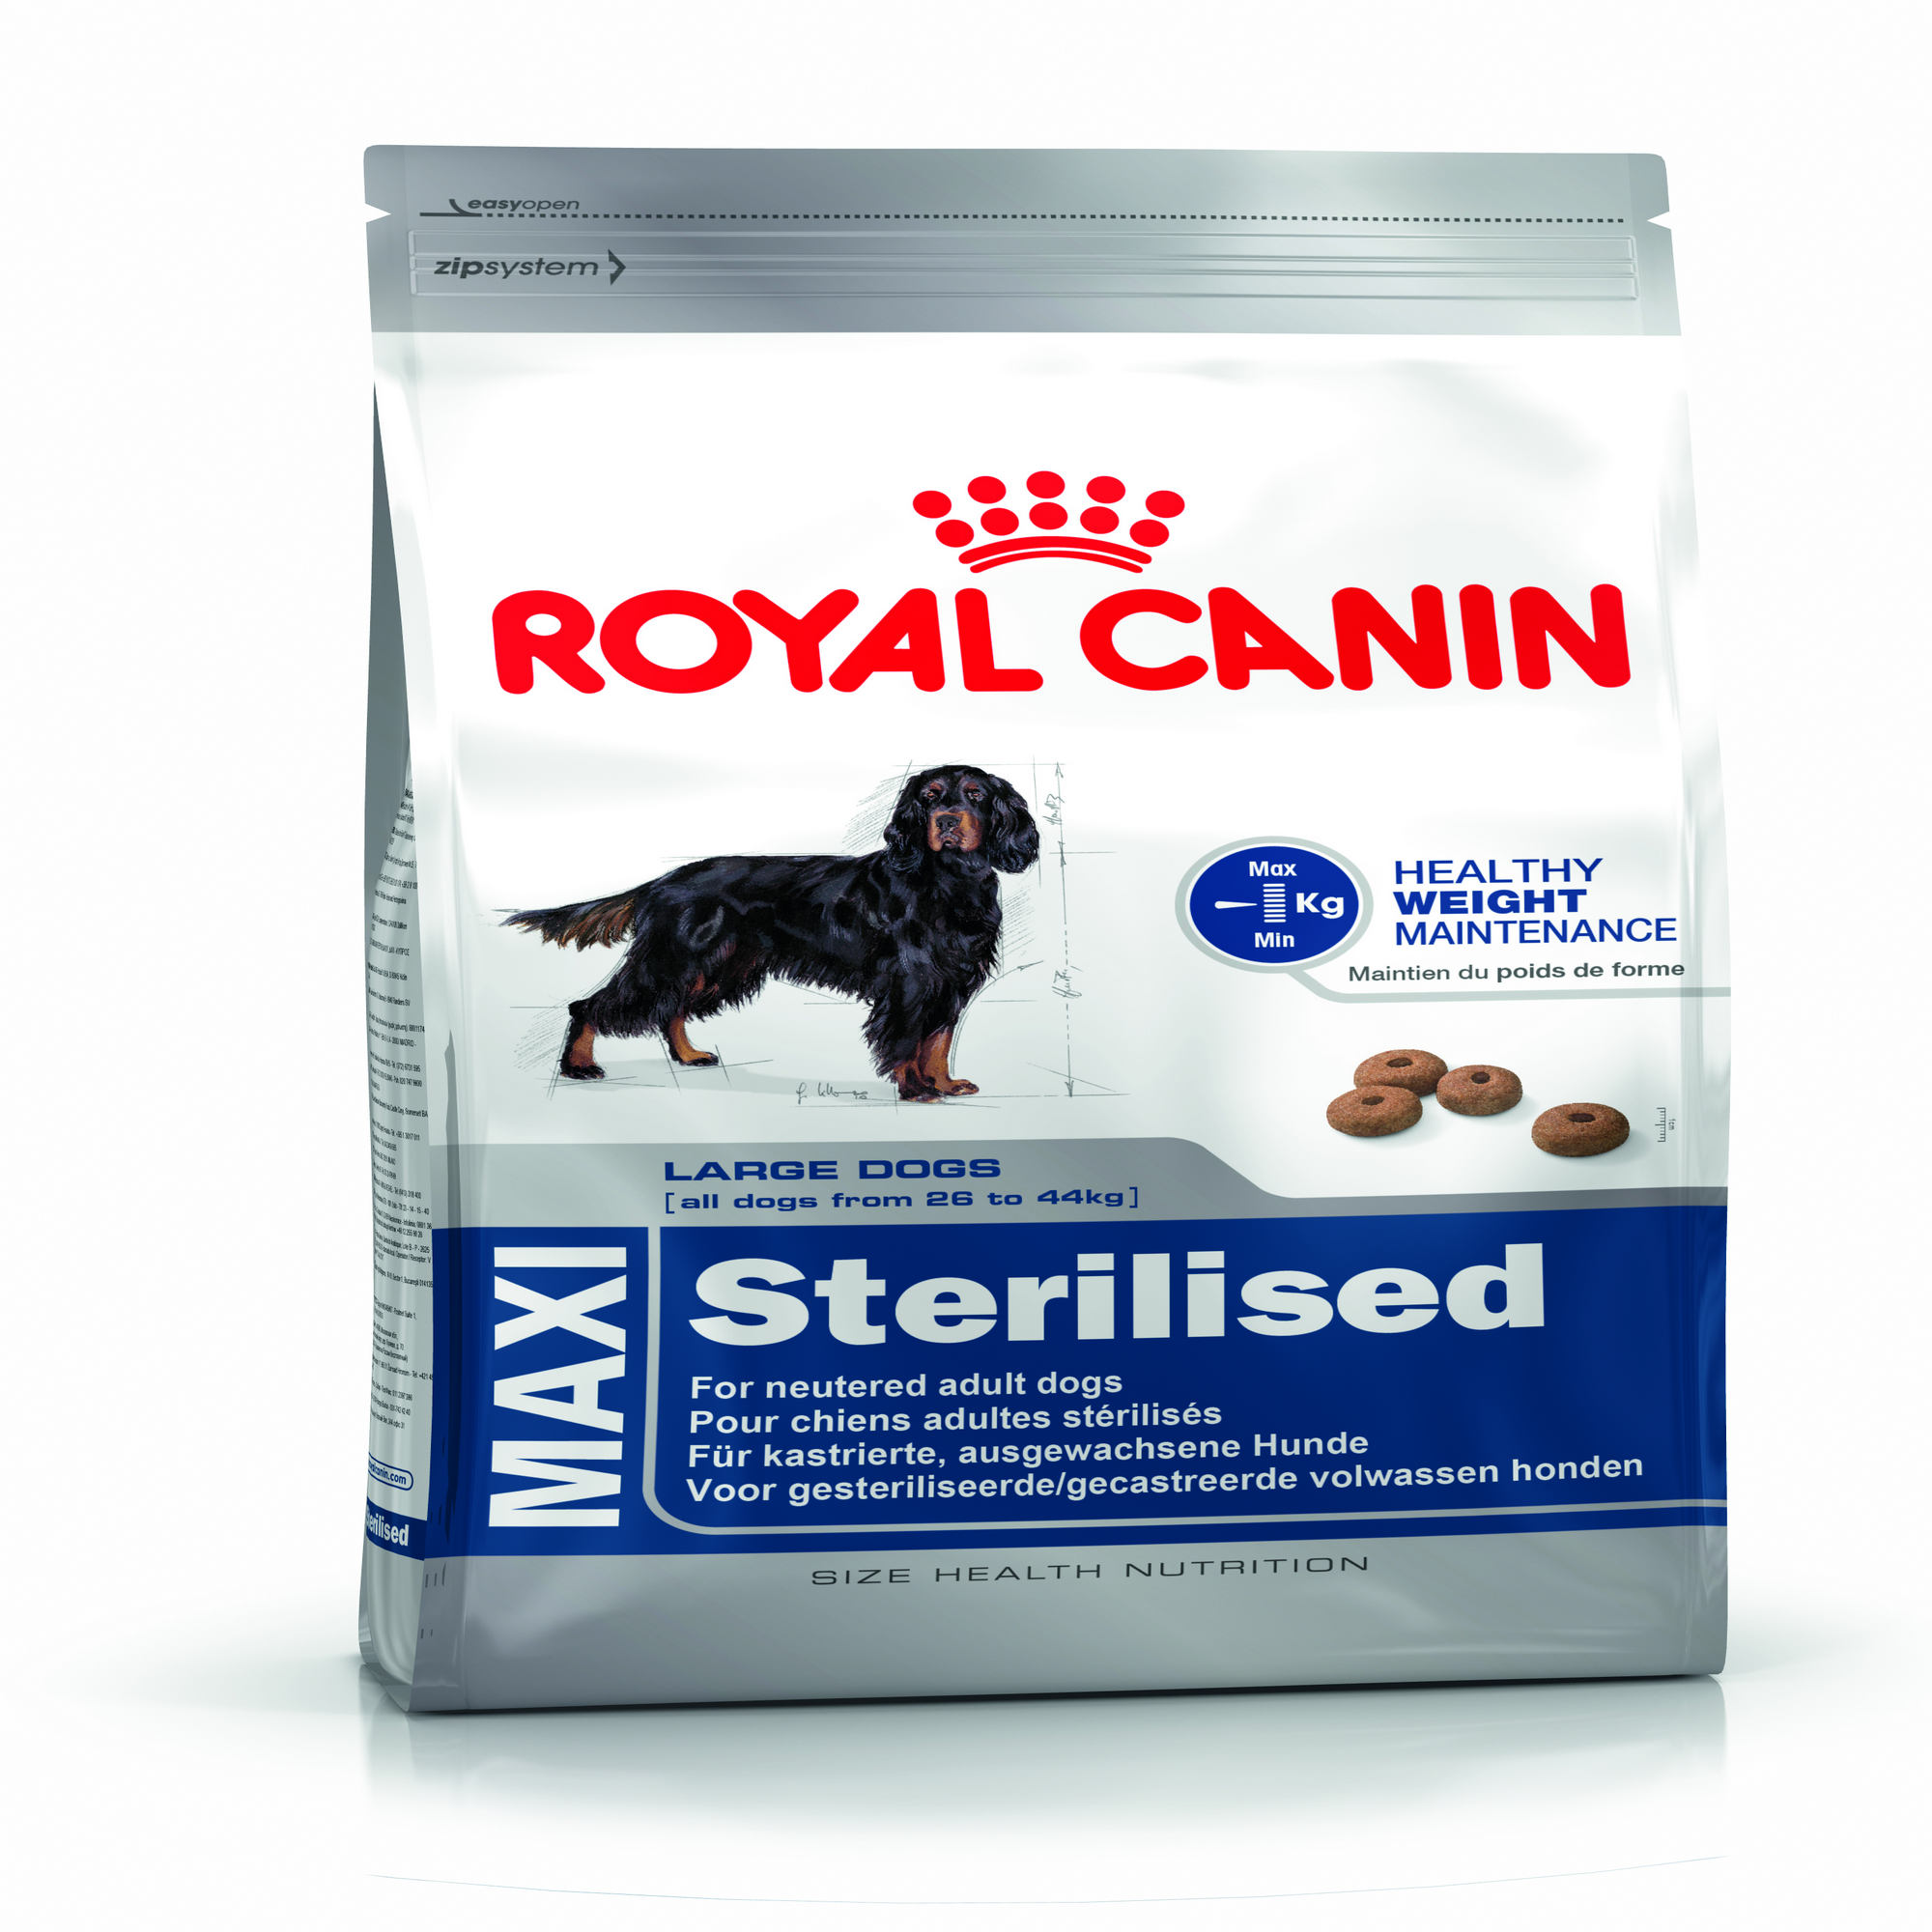 Royal Canin MAXI Sterilised 3 Kg + product picture